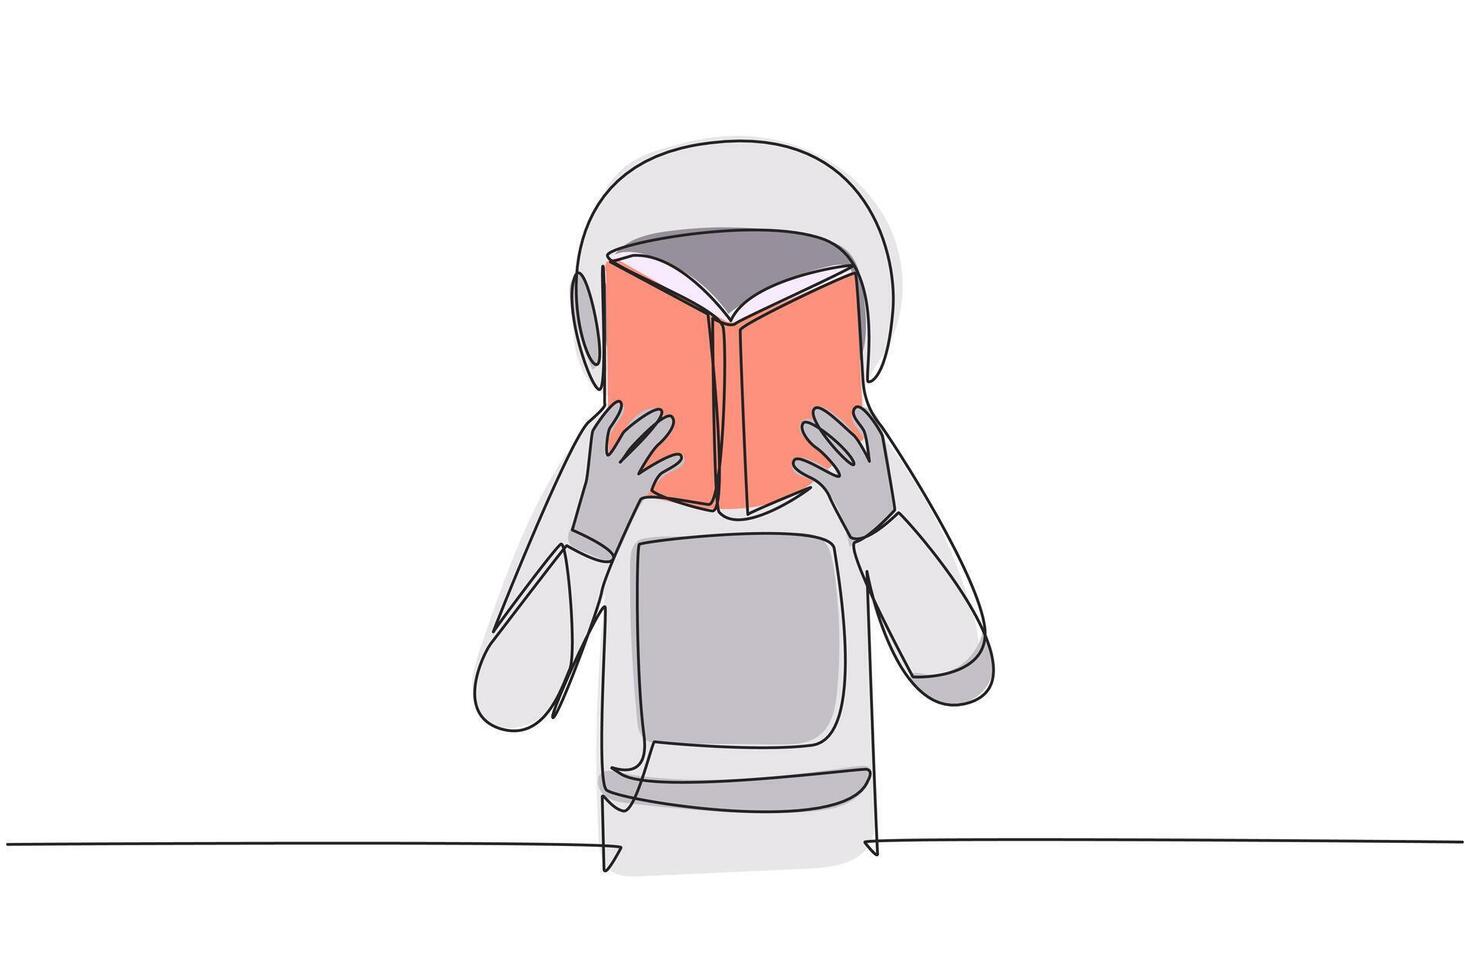 Single one line drawing astronaut seriously reading book until cover the face. Nervous when facing the final exams. Try to focus. Reading increase insight. Continuous line design graphic illustration vector